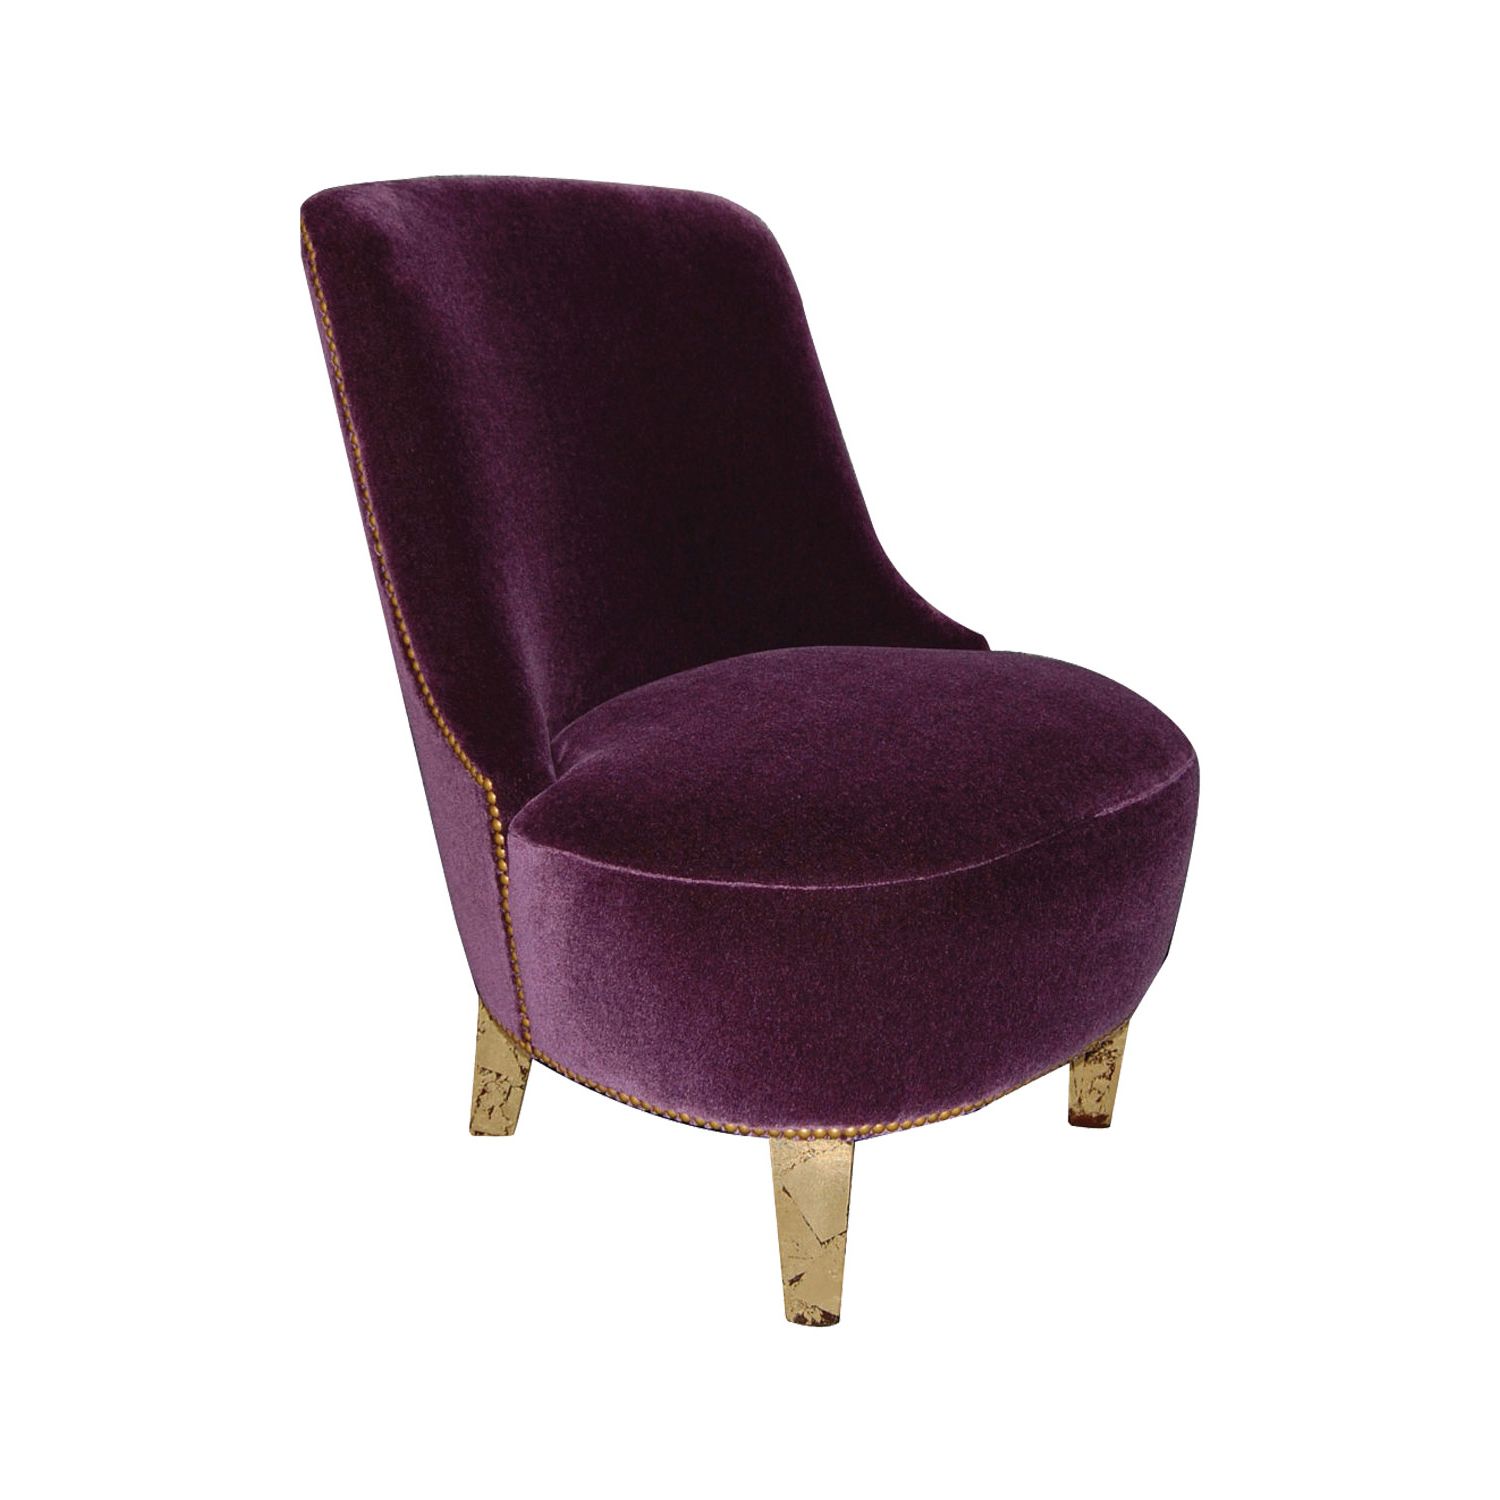 Widely Used Armless Upholstered Slipper Chairs In Emma Armless Slipper Chair – Dering Hall (View 1 of 20)